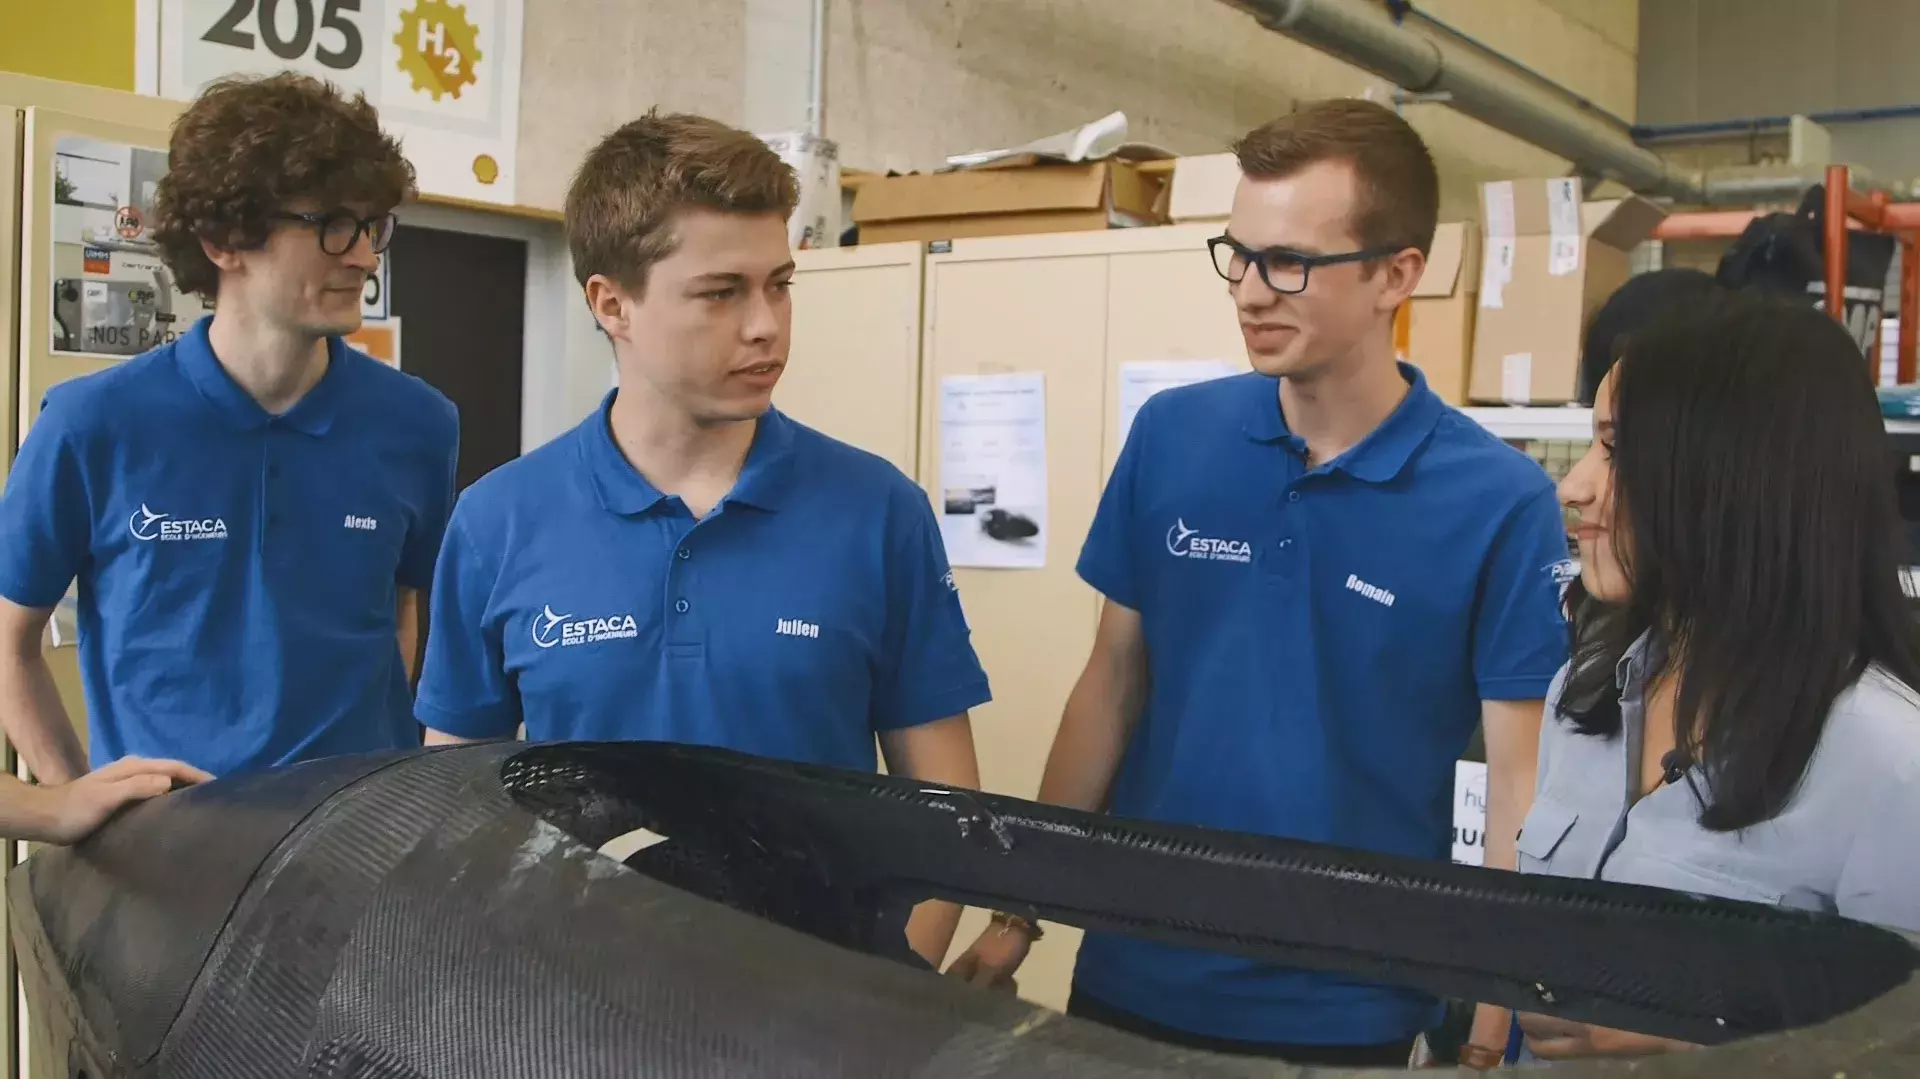 Shell Eco Marathon Episode 1 - ESTACA's PV3e team is getting ready for the competition